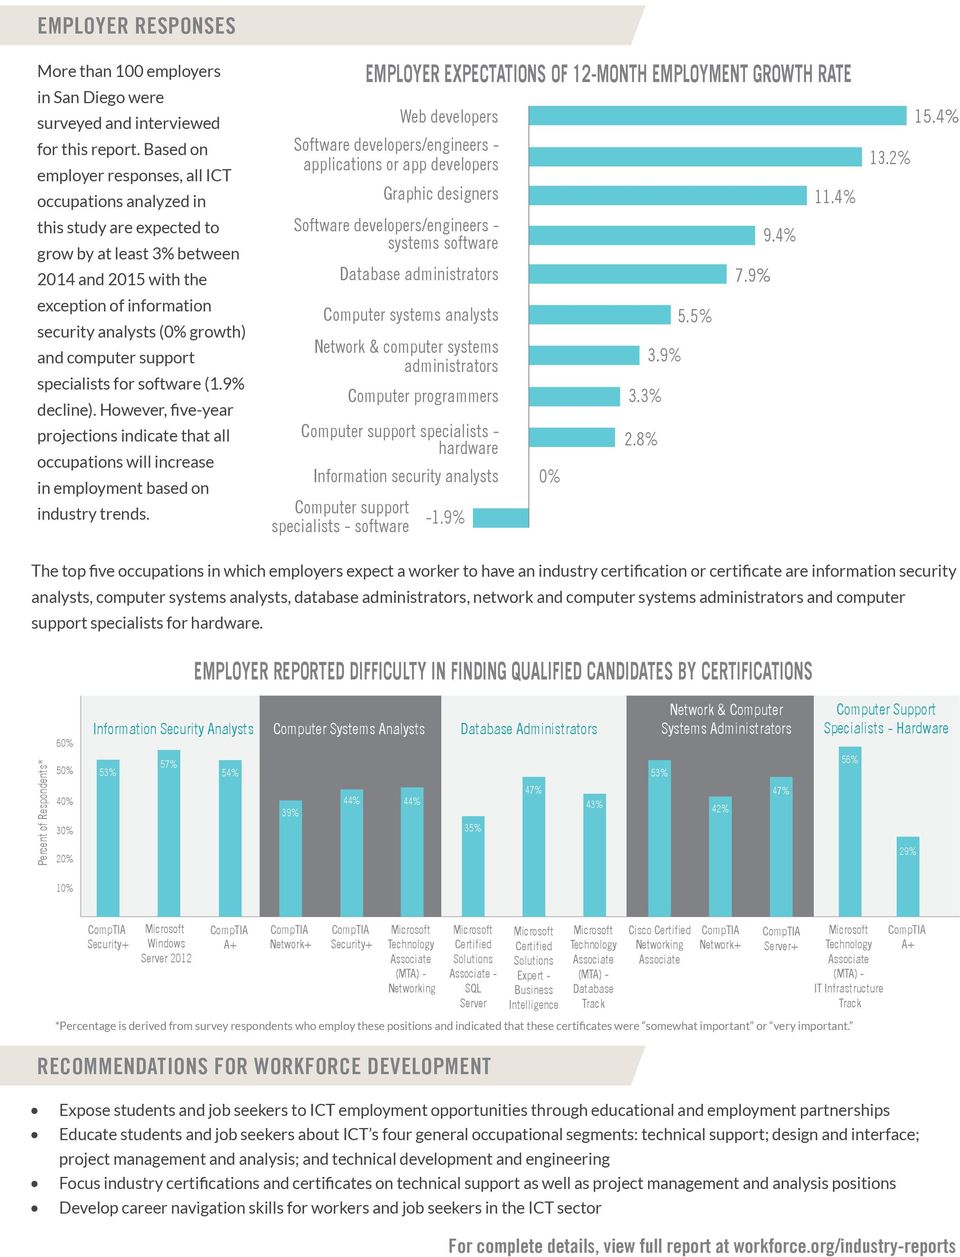 computer support specialists for software (1.9% decline). However, five-year projections indicate that all occupations will increase in employment based on industry trends.